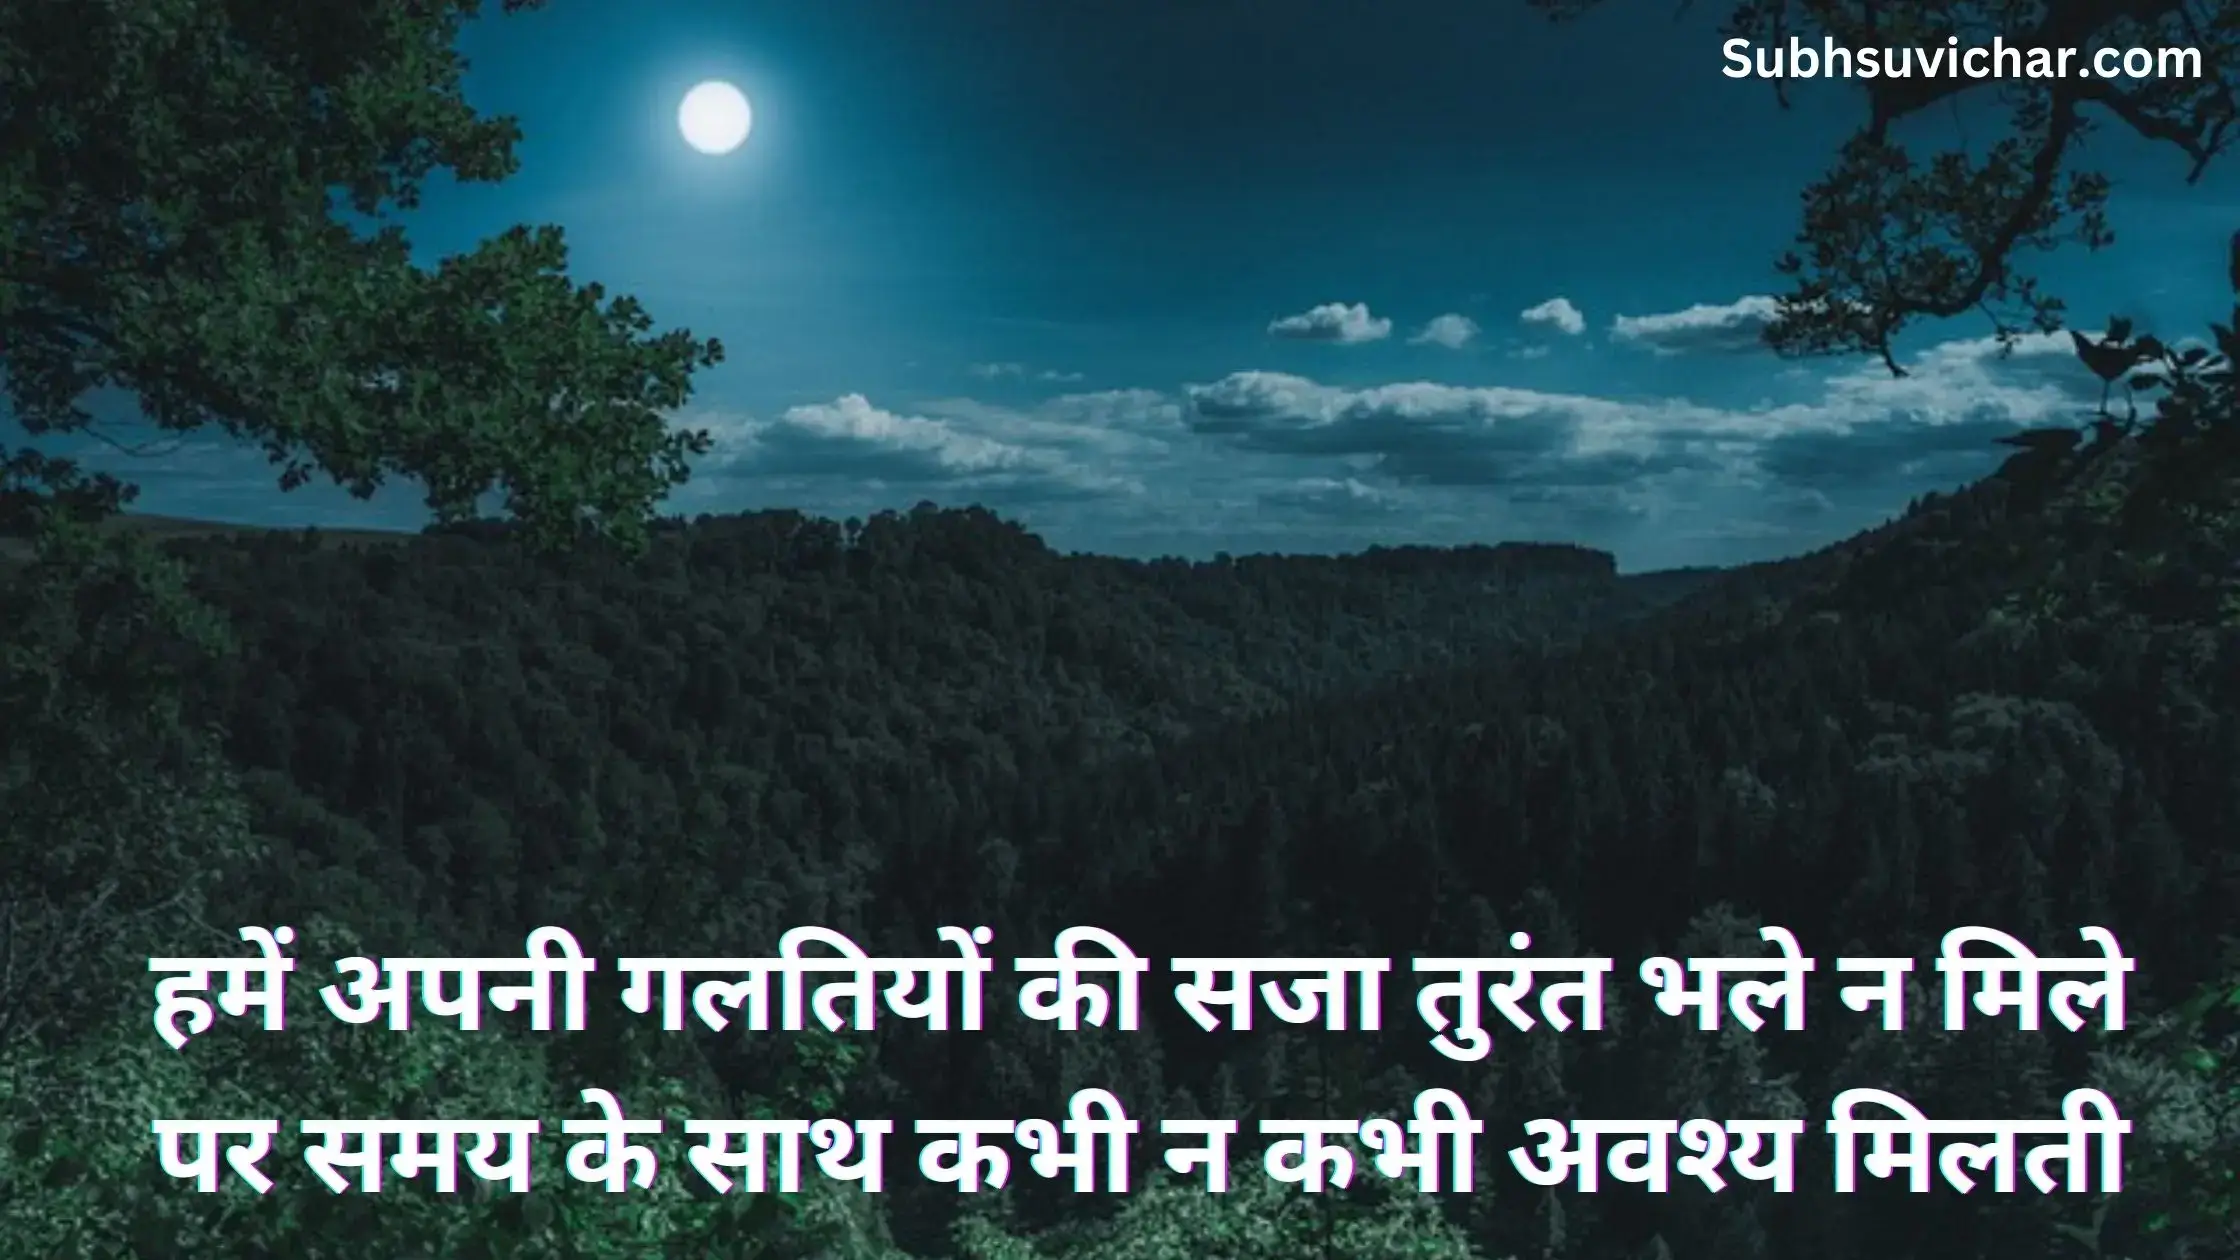 This post contains huge collection of anmol vachan suvichar in hindi font with images for your whatsaap and facebook status.